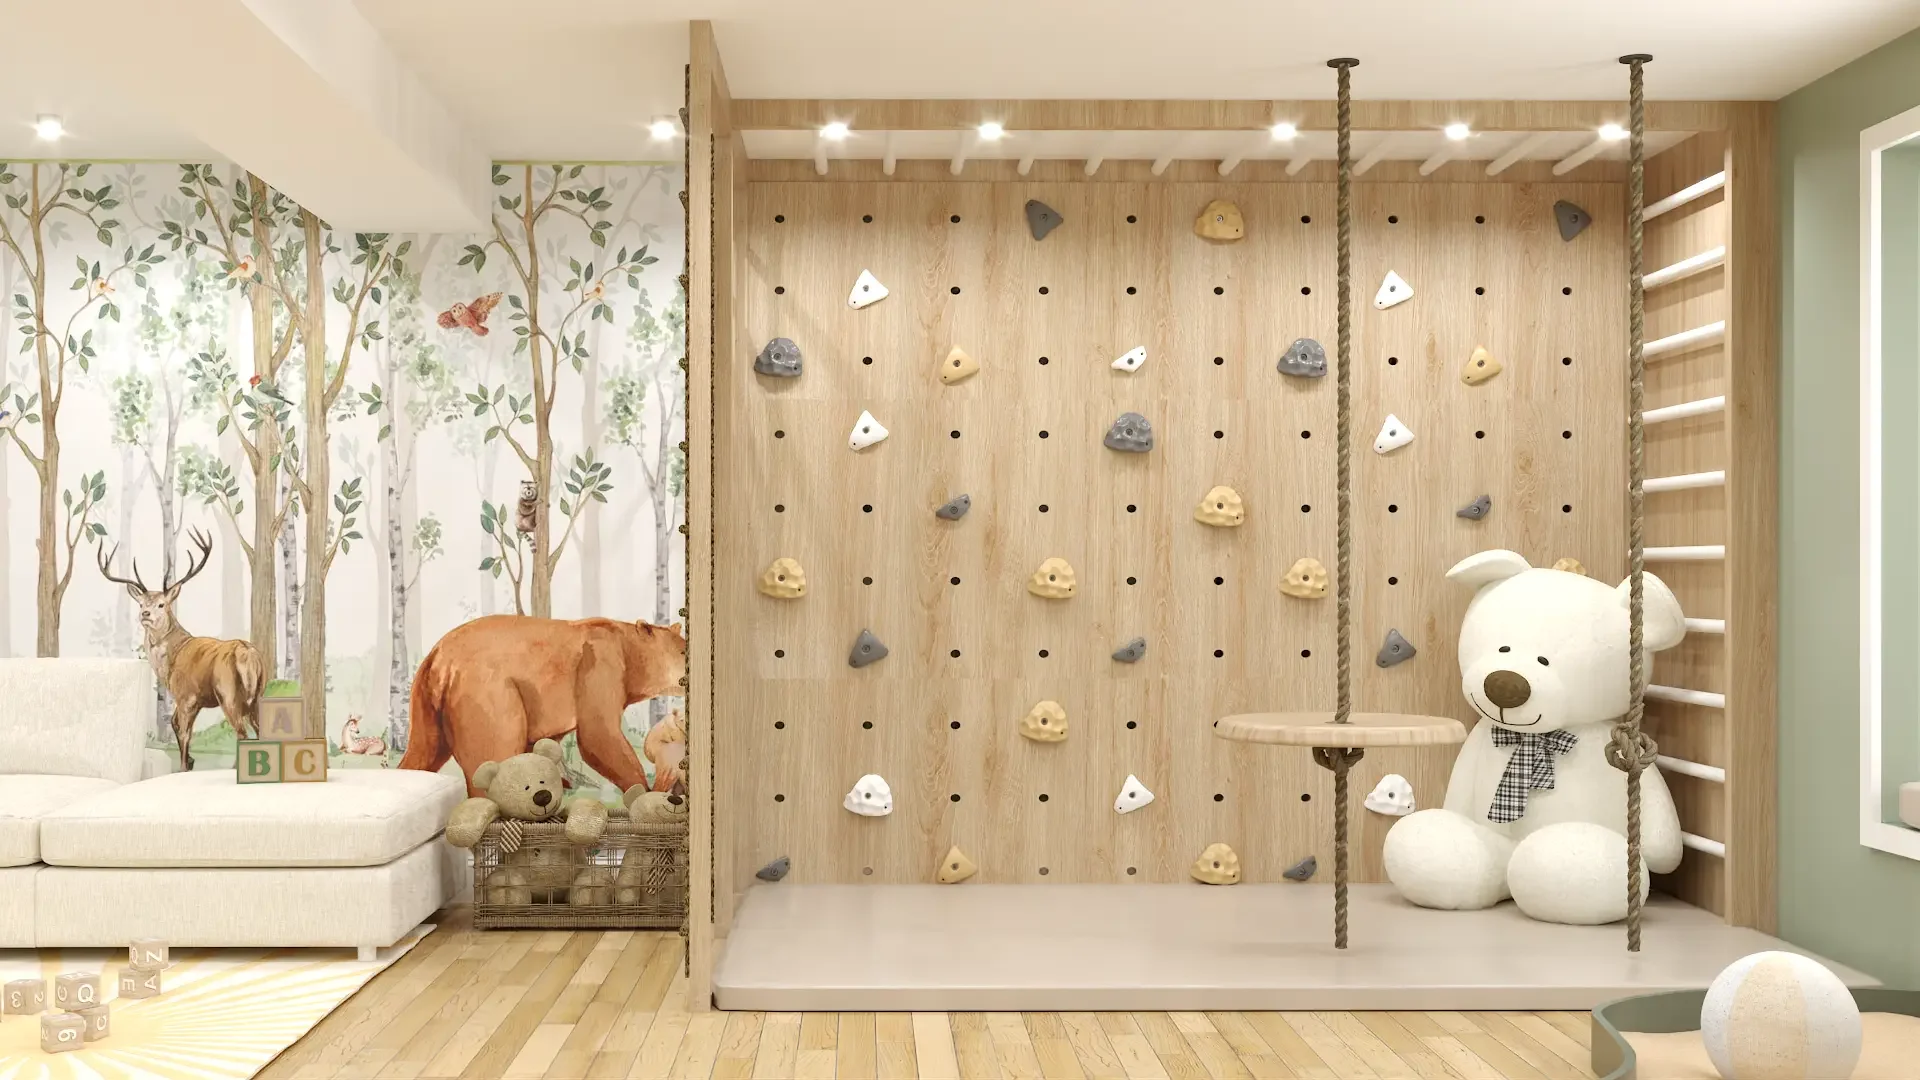 Child's room with a wooden climbing wall and comfortable play area, fostering adventure and creativity, designed by Debora, an online interior design service based in New York City.